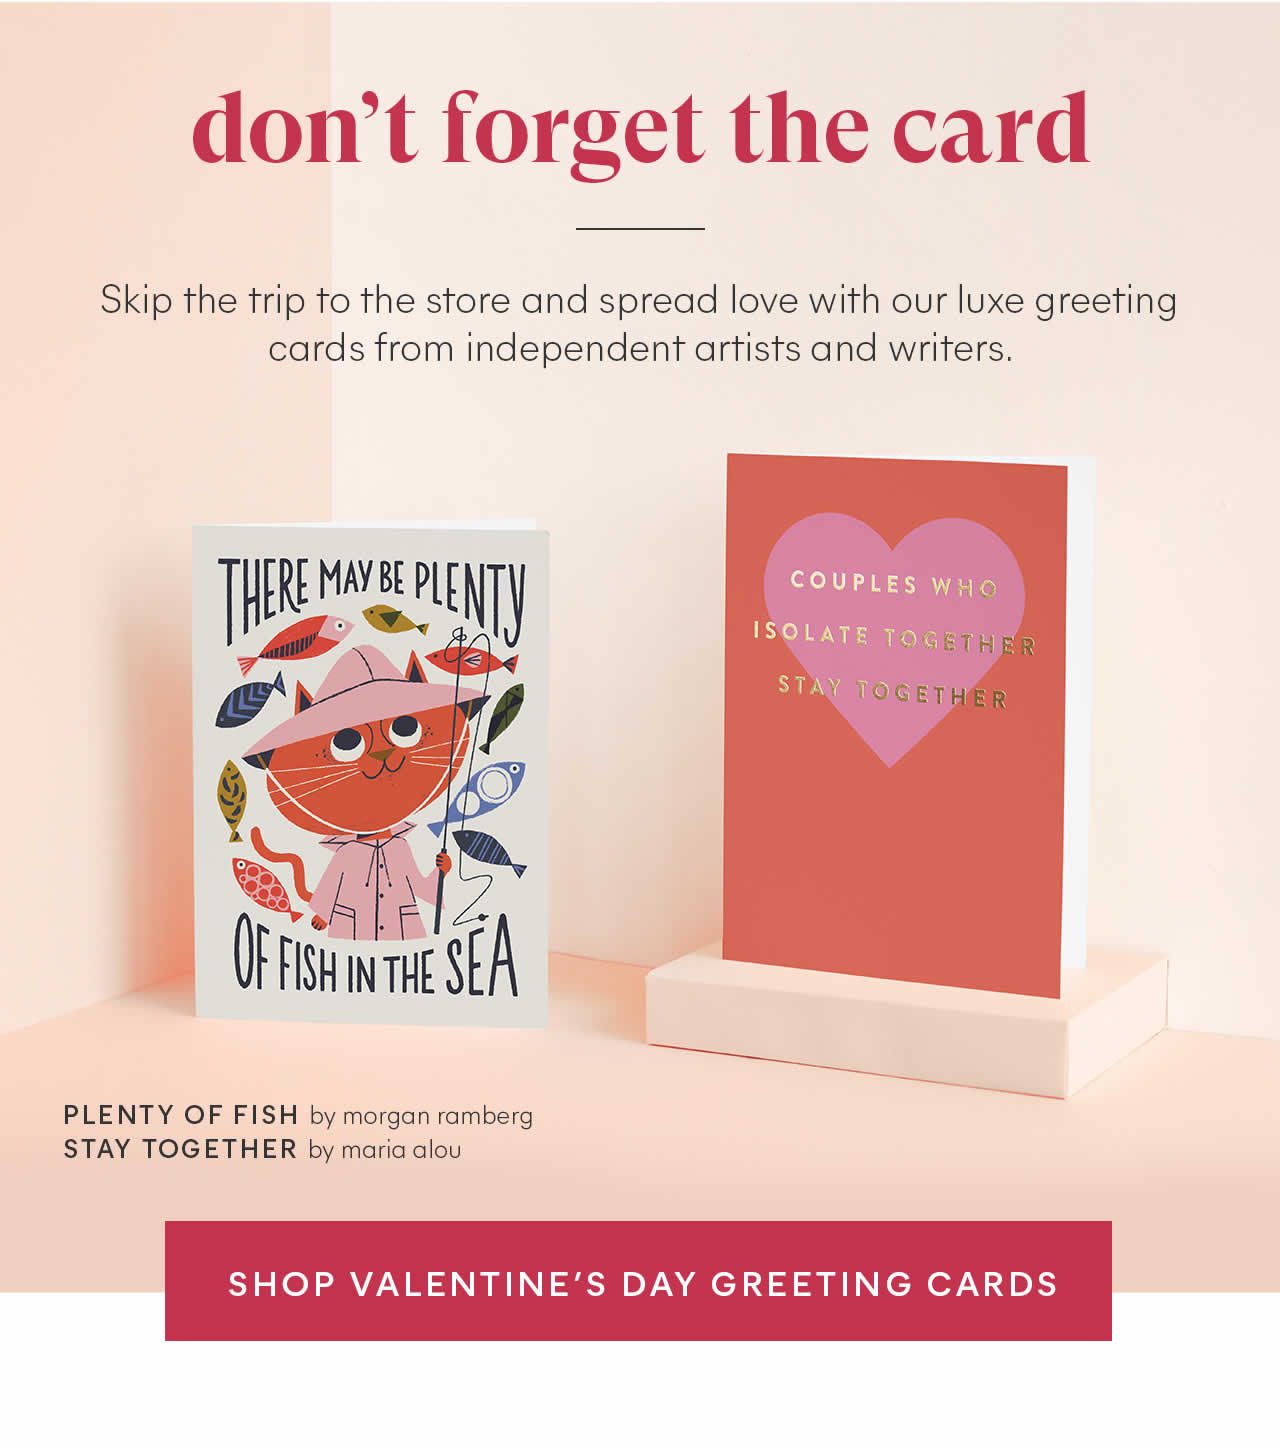 Shop Valentine's Day Greeting Cards